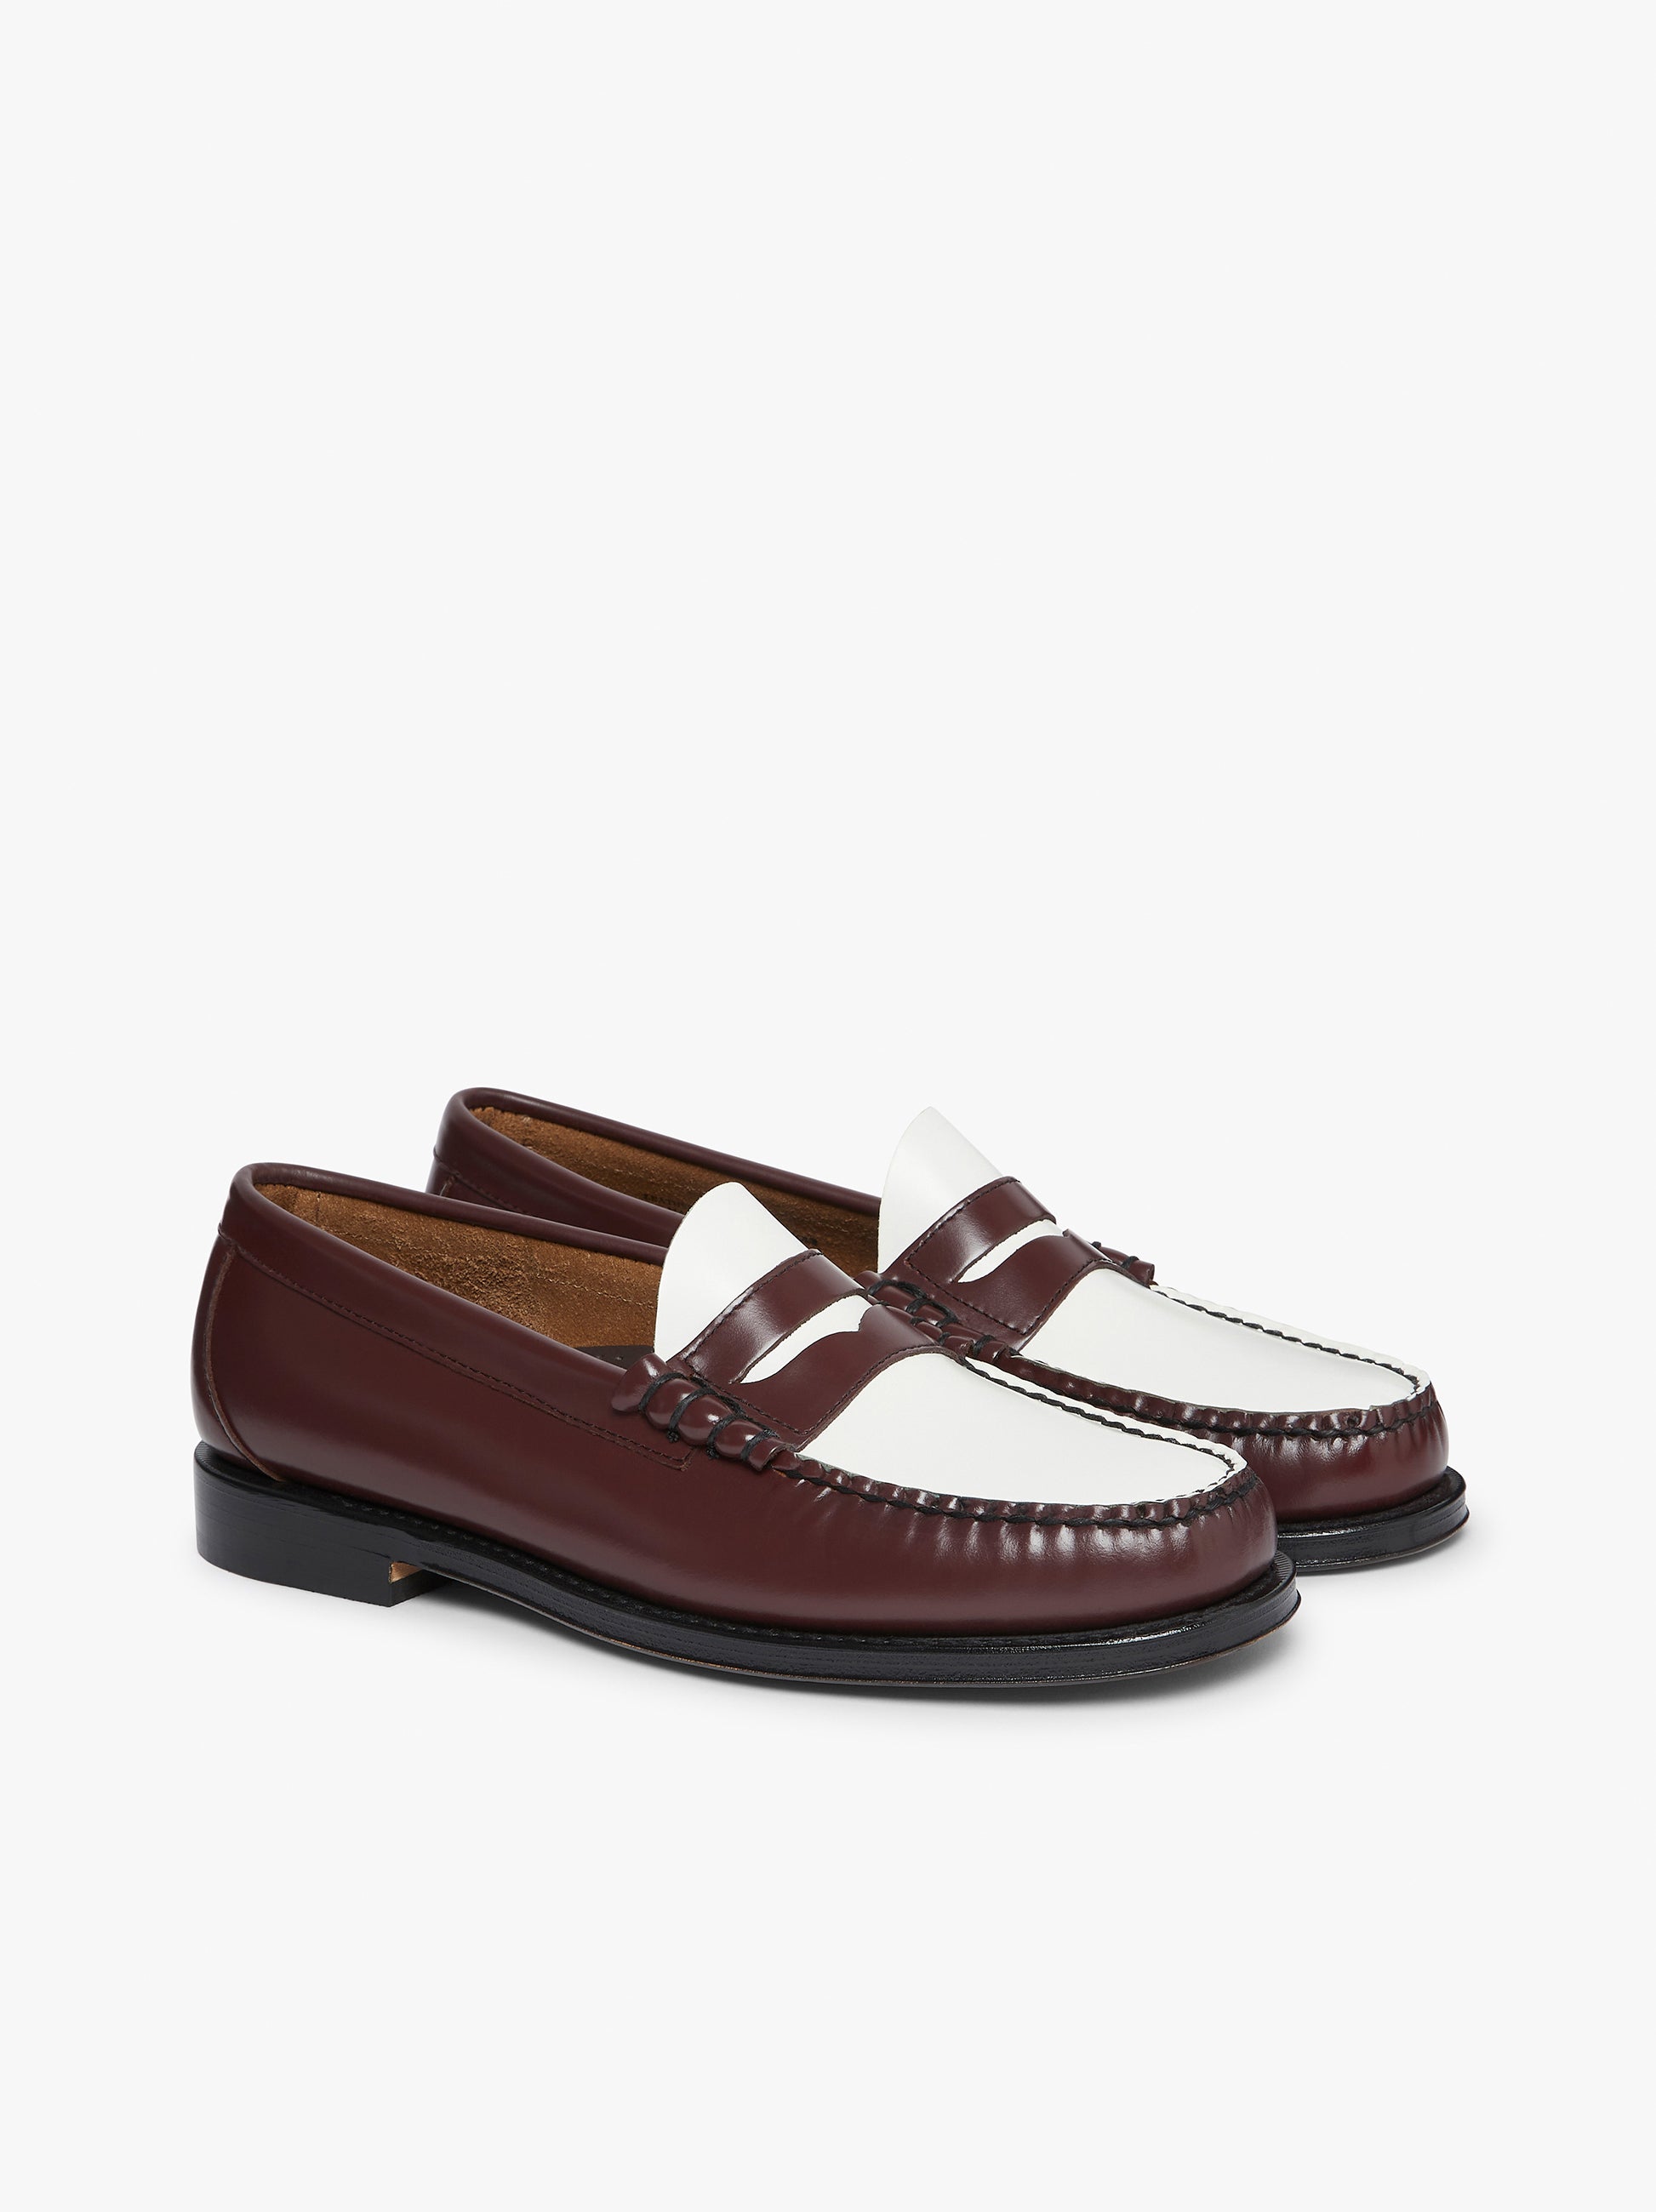 Wine And White Loafers | Weejuns Penny Loafers G.H.BASS – G.H.BASS ...